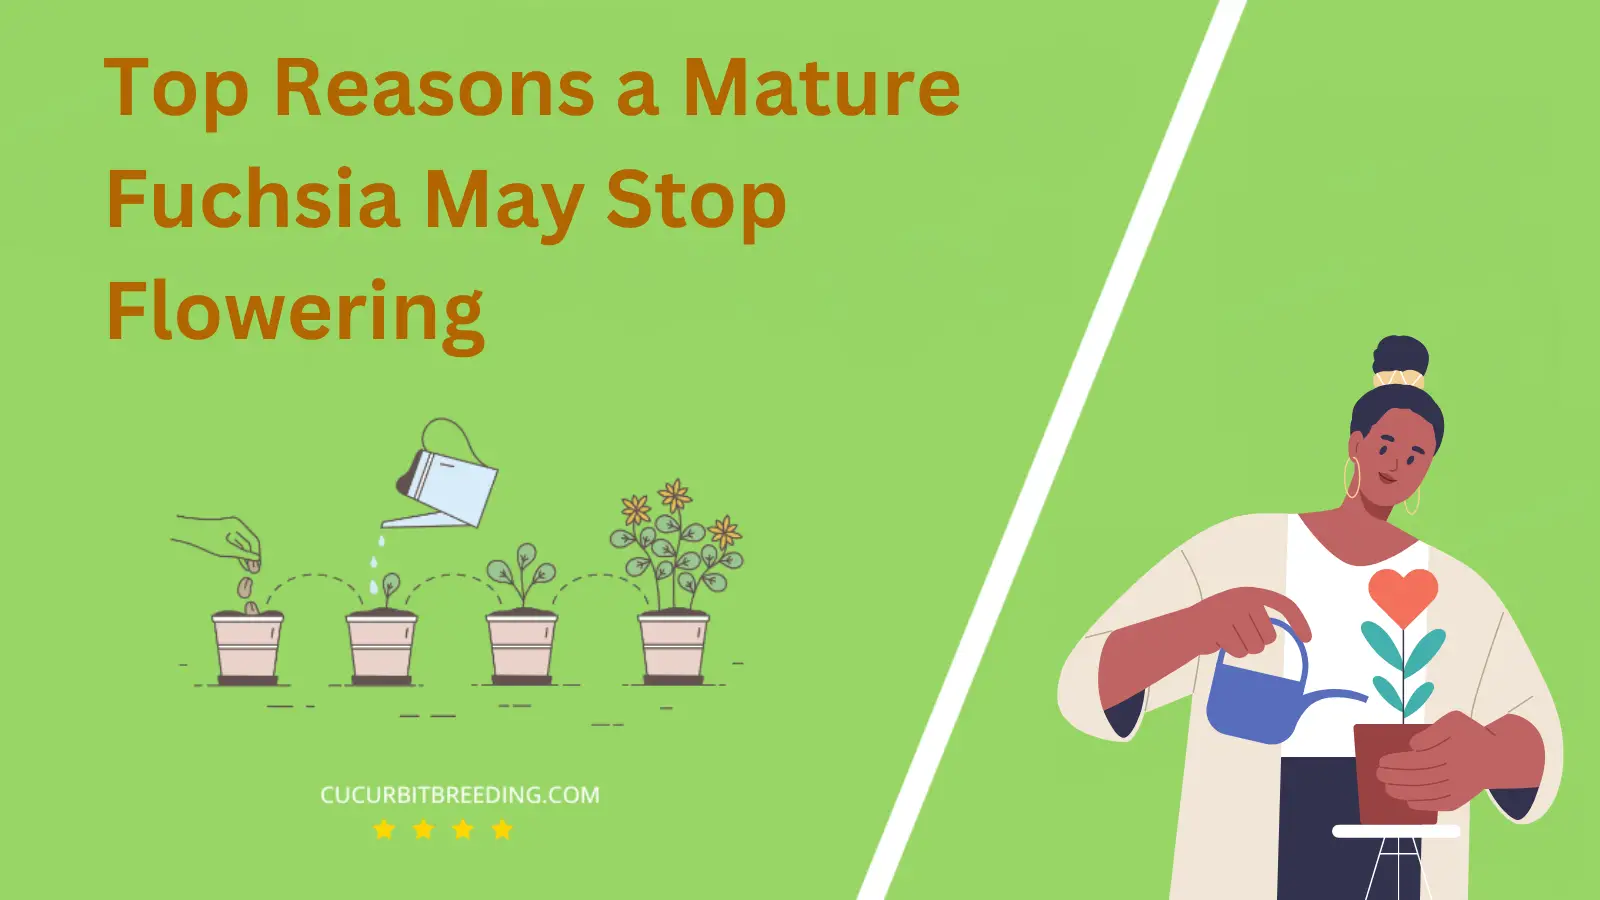 Top Reasons a Mature Fuchsia May Stop Flowering